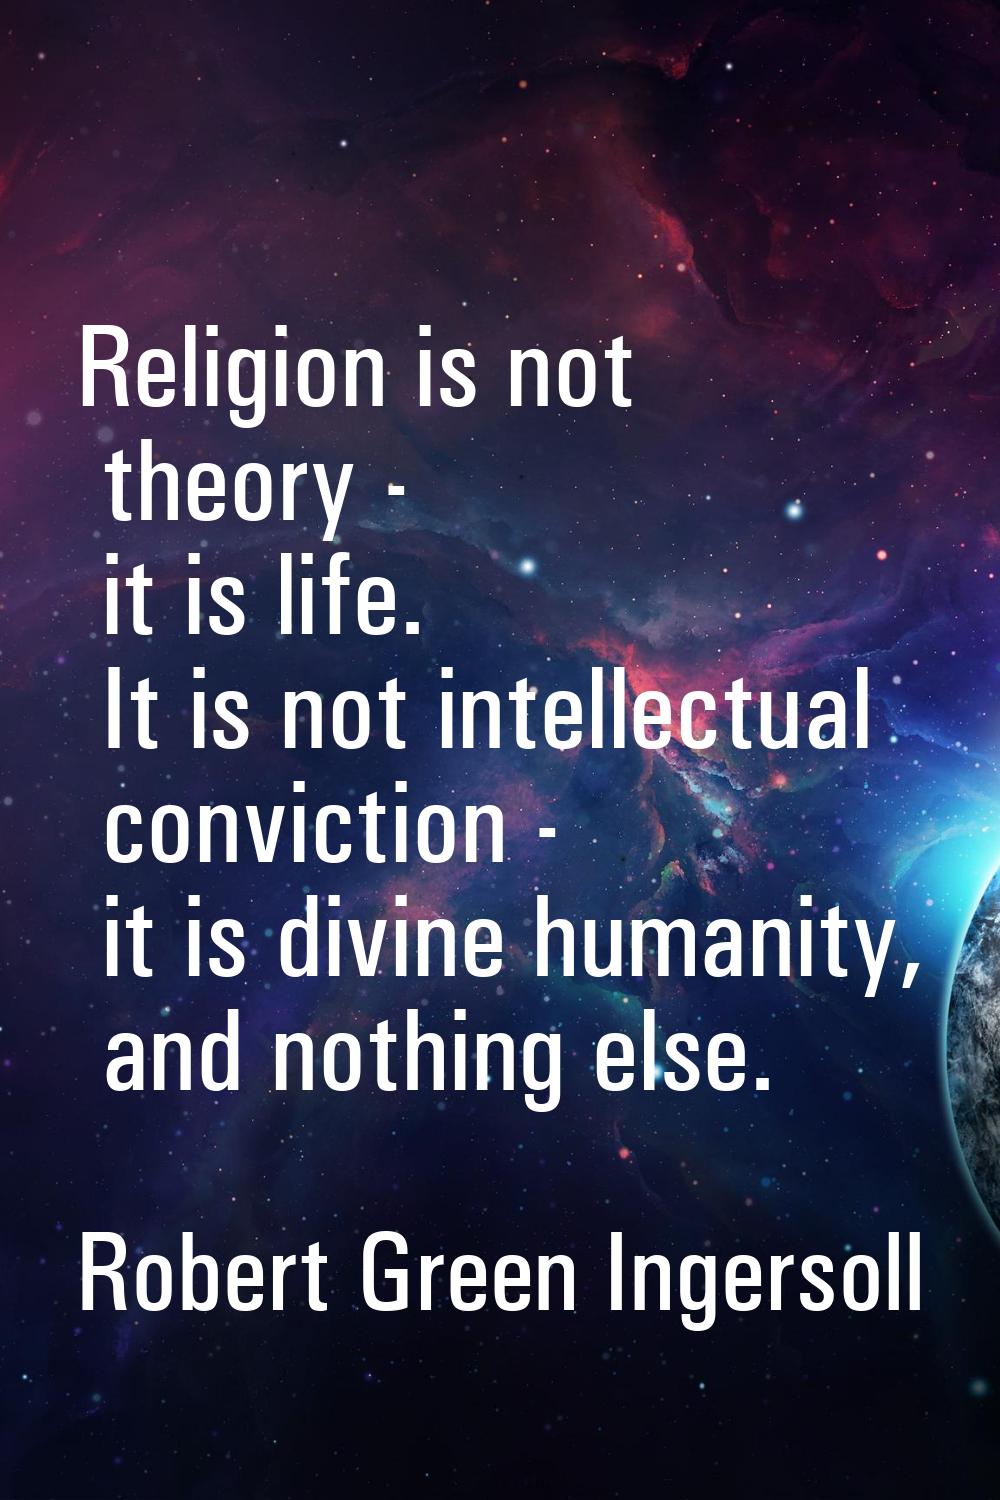 Religion is not theory - it is life. It is not intellectual conviction - it is divine humanity, and